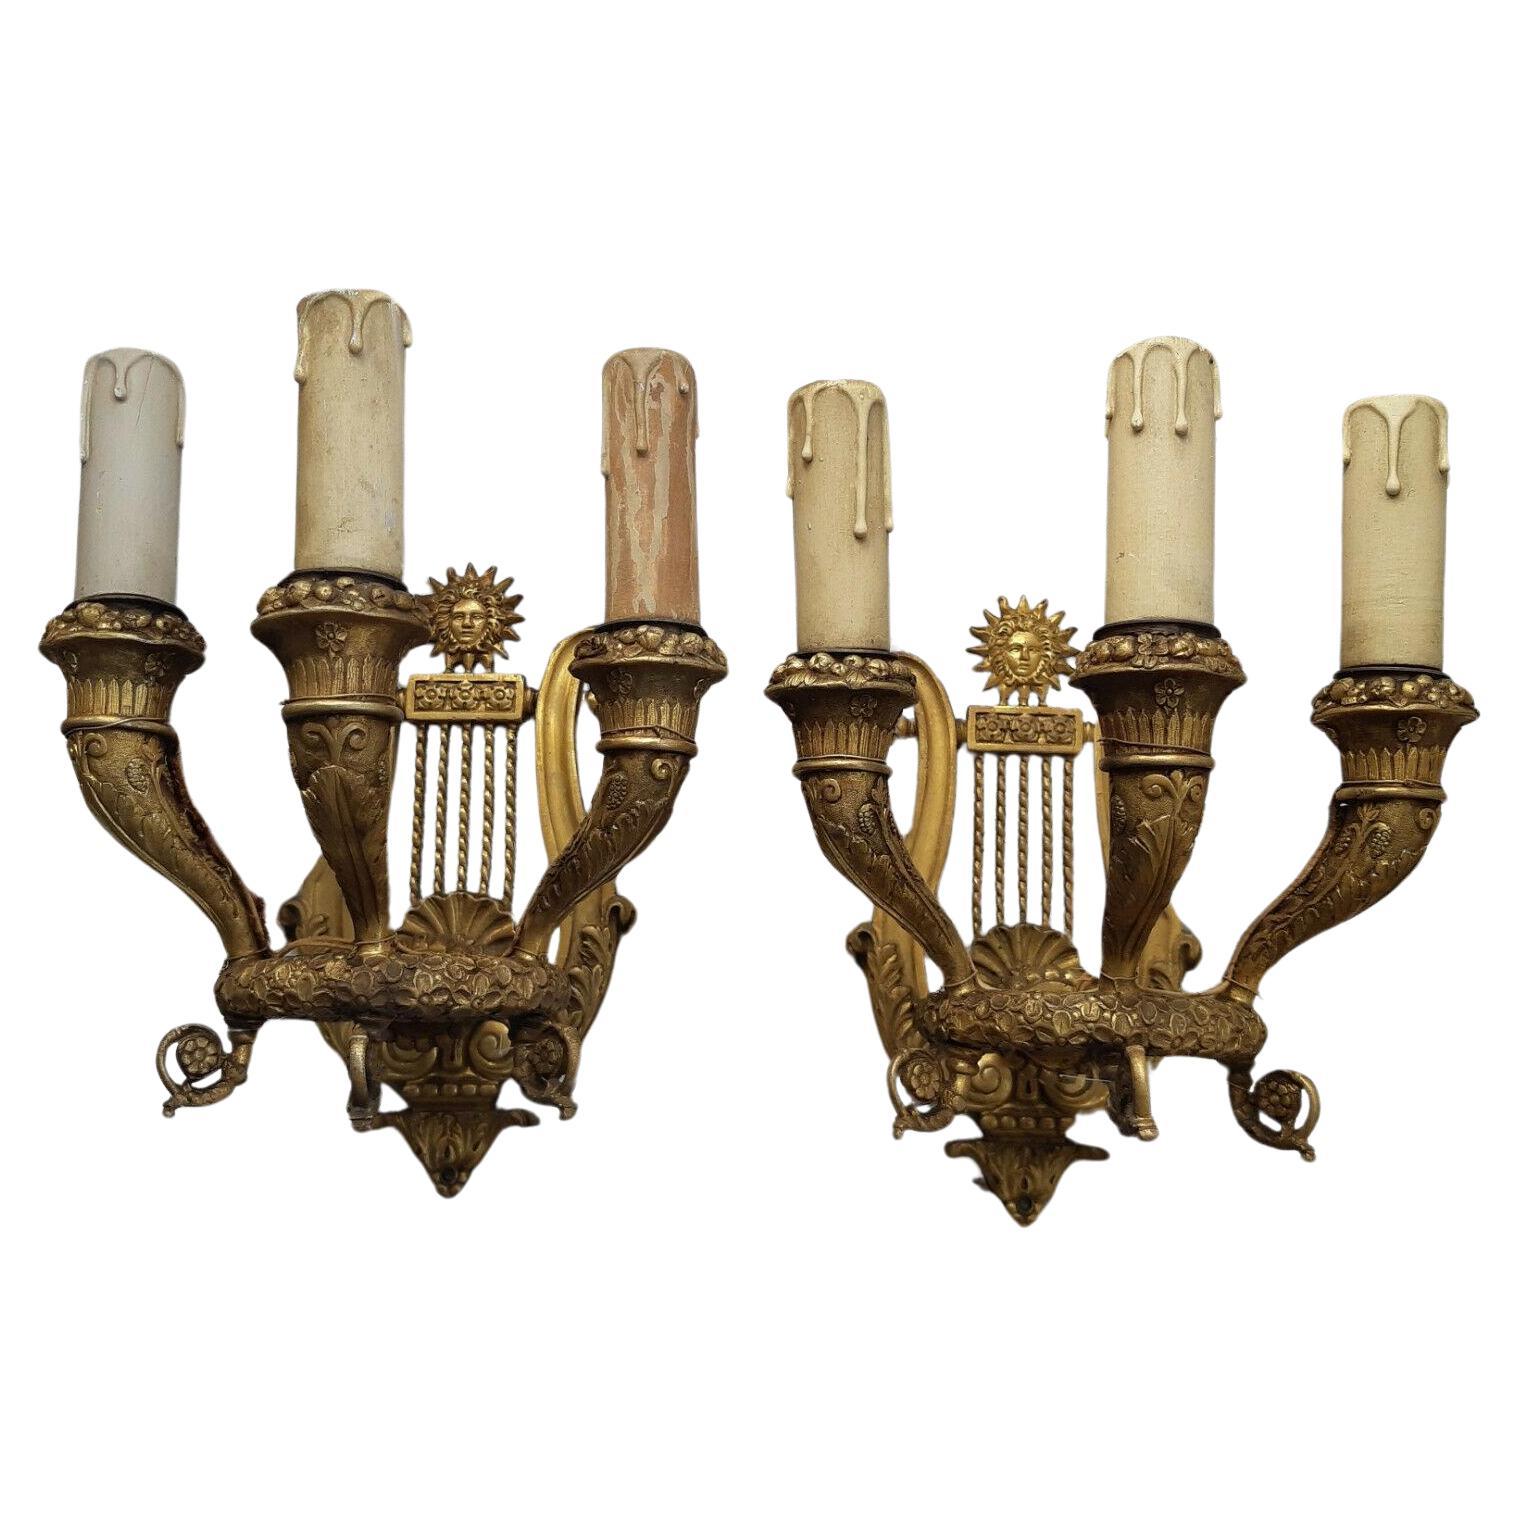 c1800 Pair French Louis XIV "The Sun King" Gilt Bronze Figural Wall Sconces  For Sale